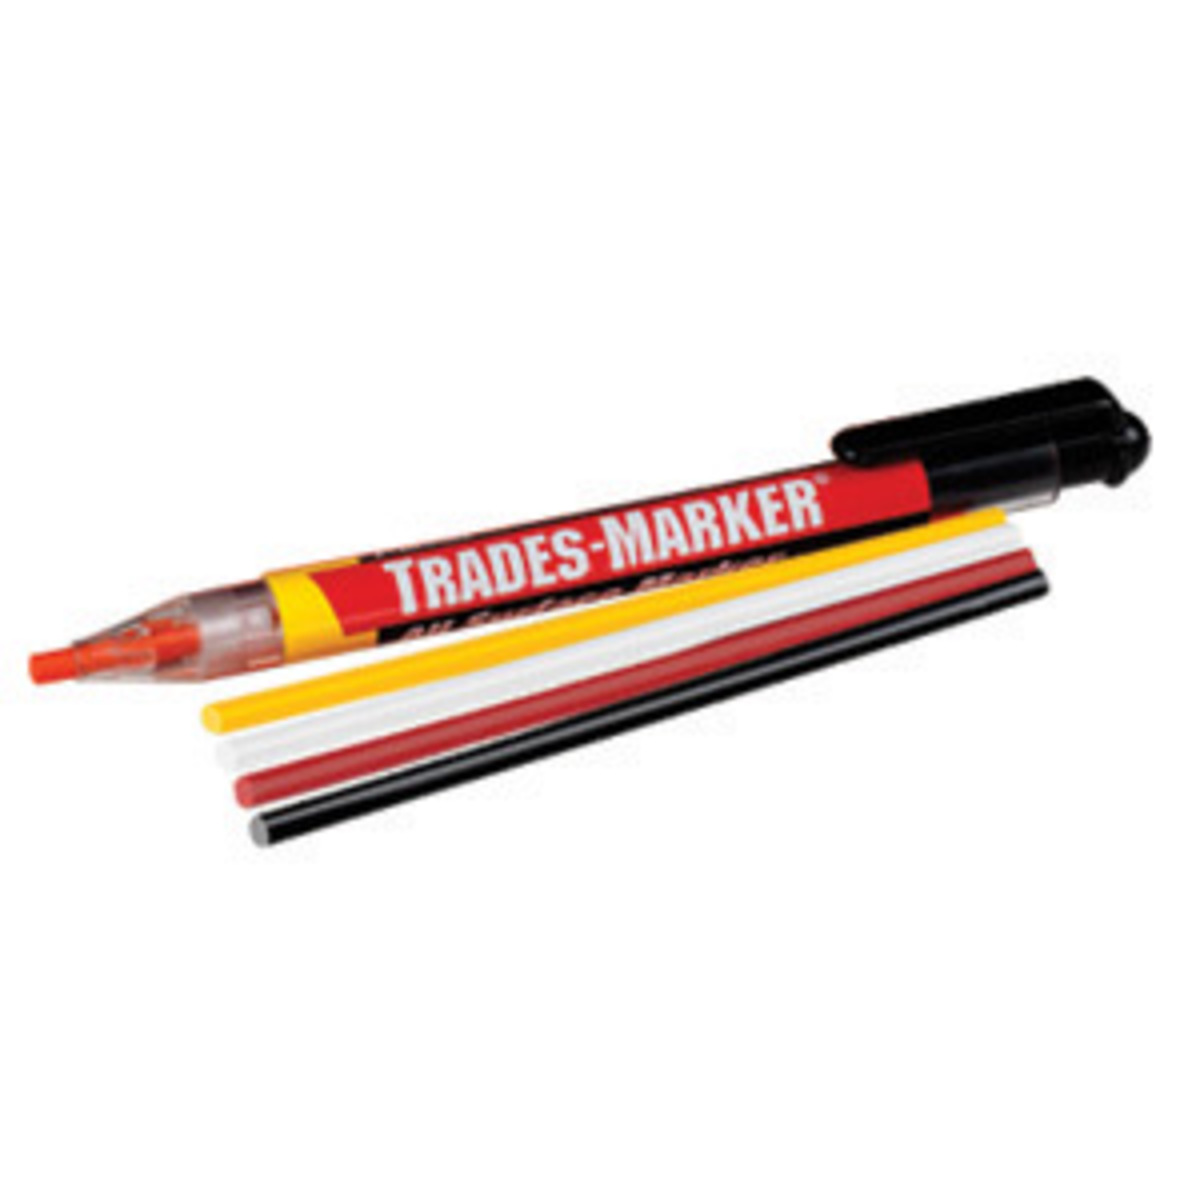 Trades Marker All-Purpose Grease Pencil with Holder Red, Black